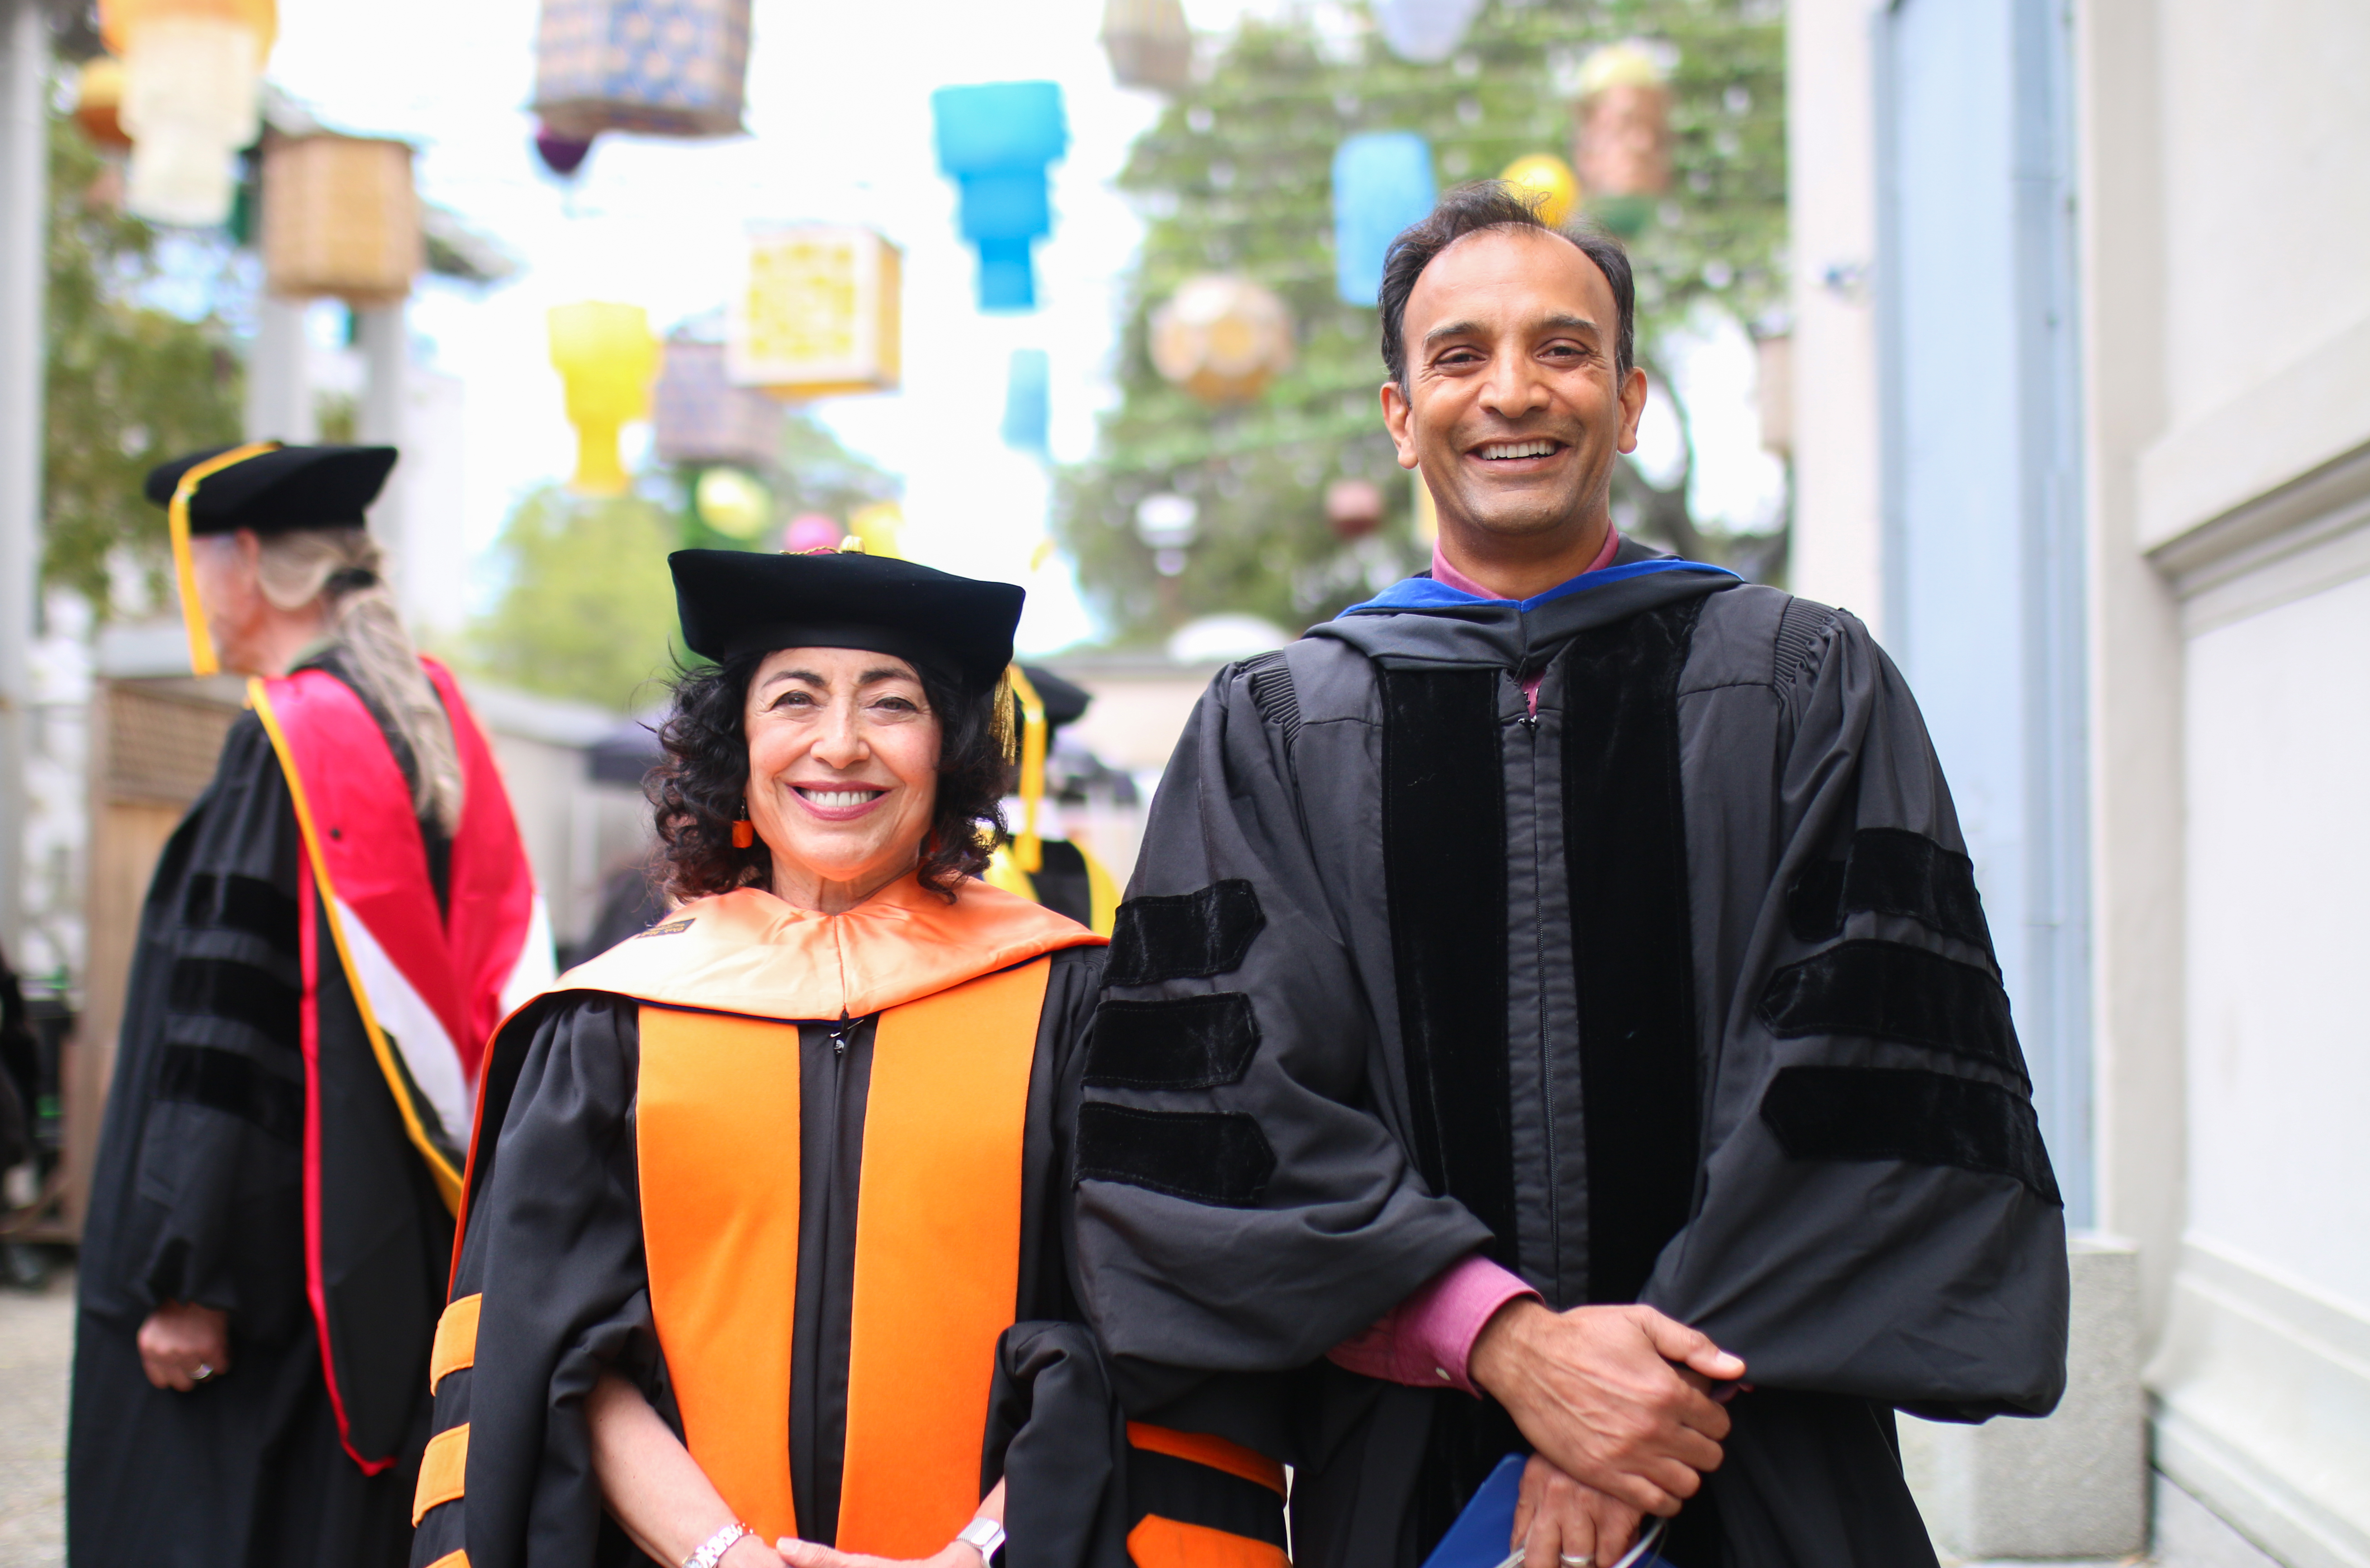 Jennifer Chayes, dean of UC Berkeley's College of Computing, Data Science, and Society, and DJ Patil, the college's dean's senior fellow, spoke at the college commencements.